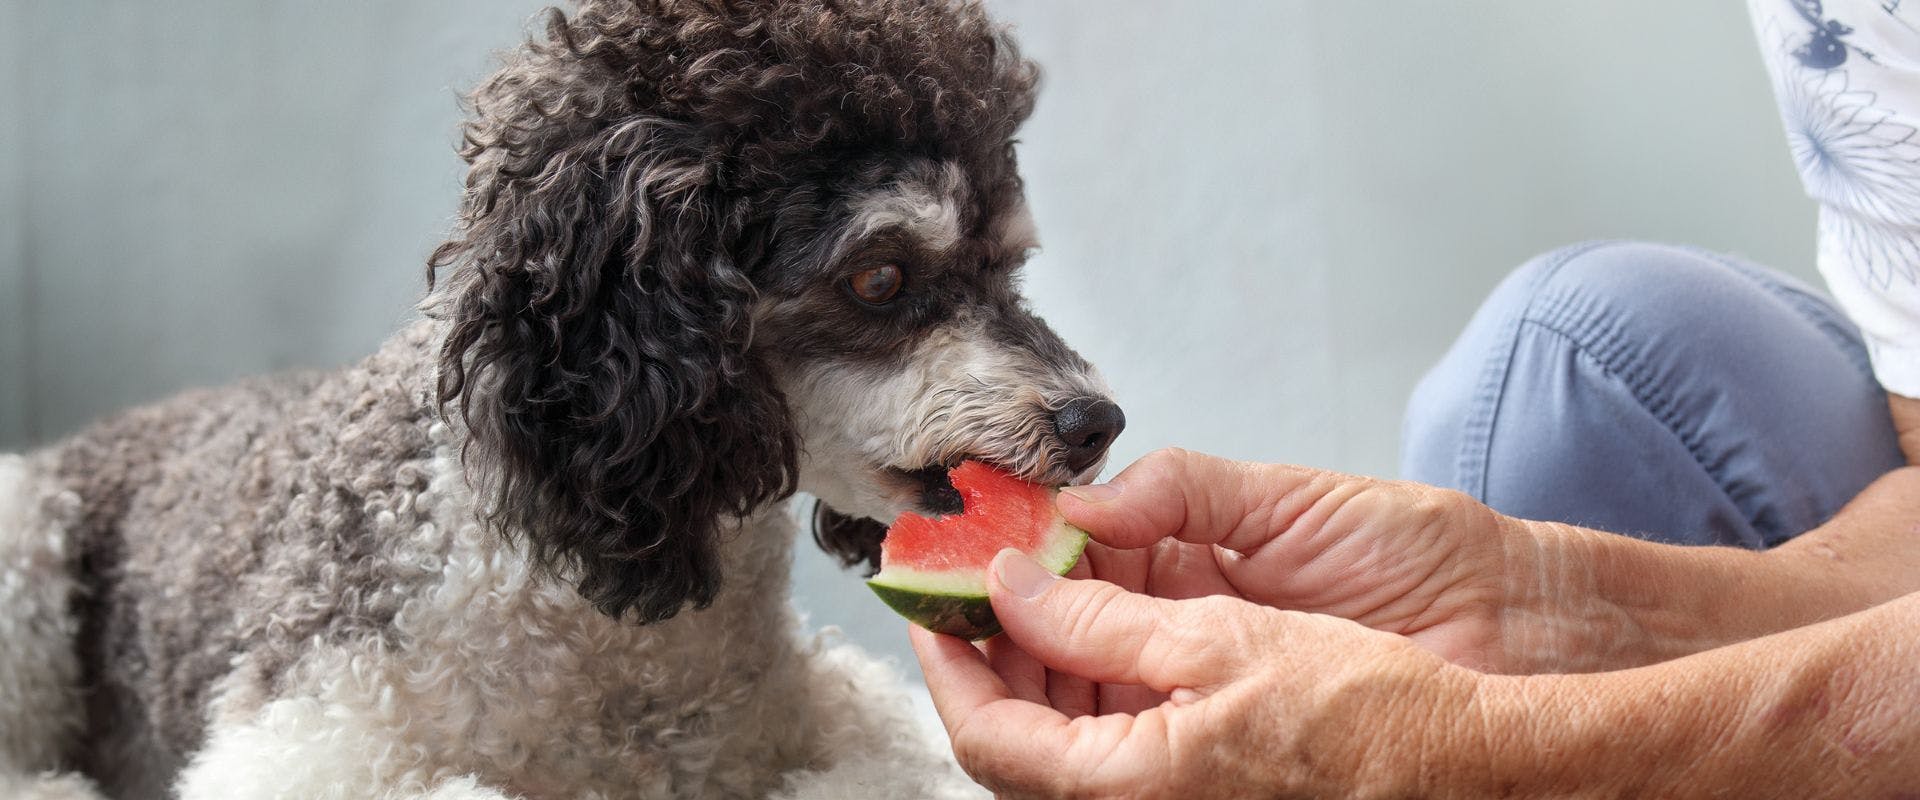 Poodle eating watermelon